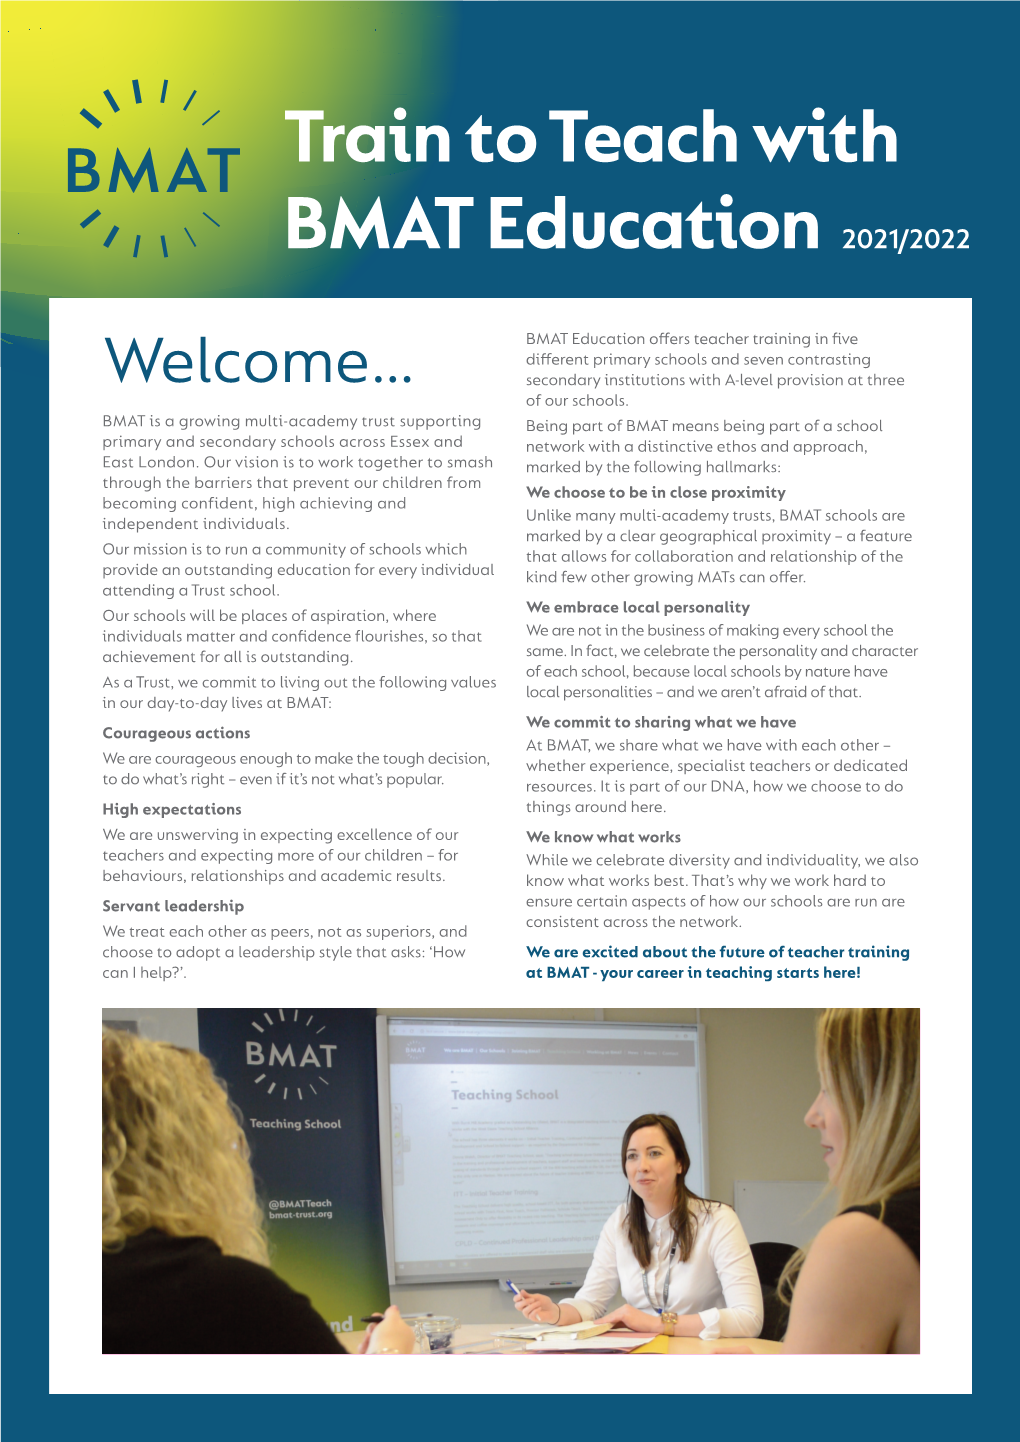 Train to Teach with BMAT Education 2021/2022